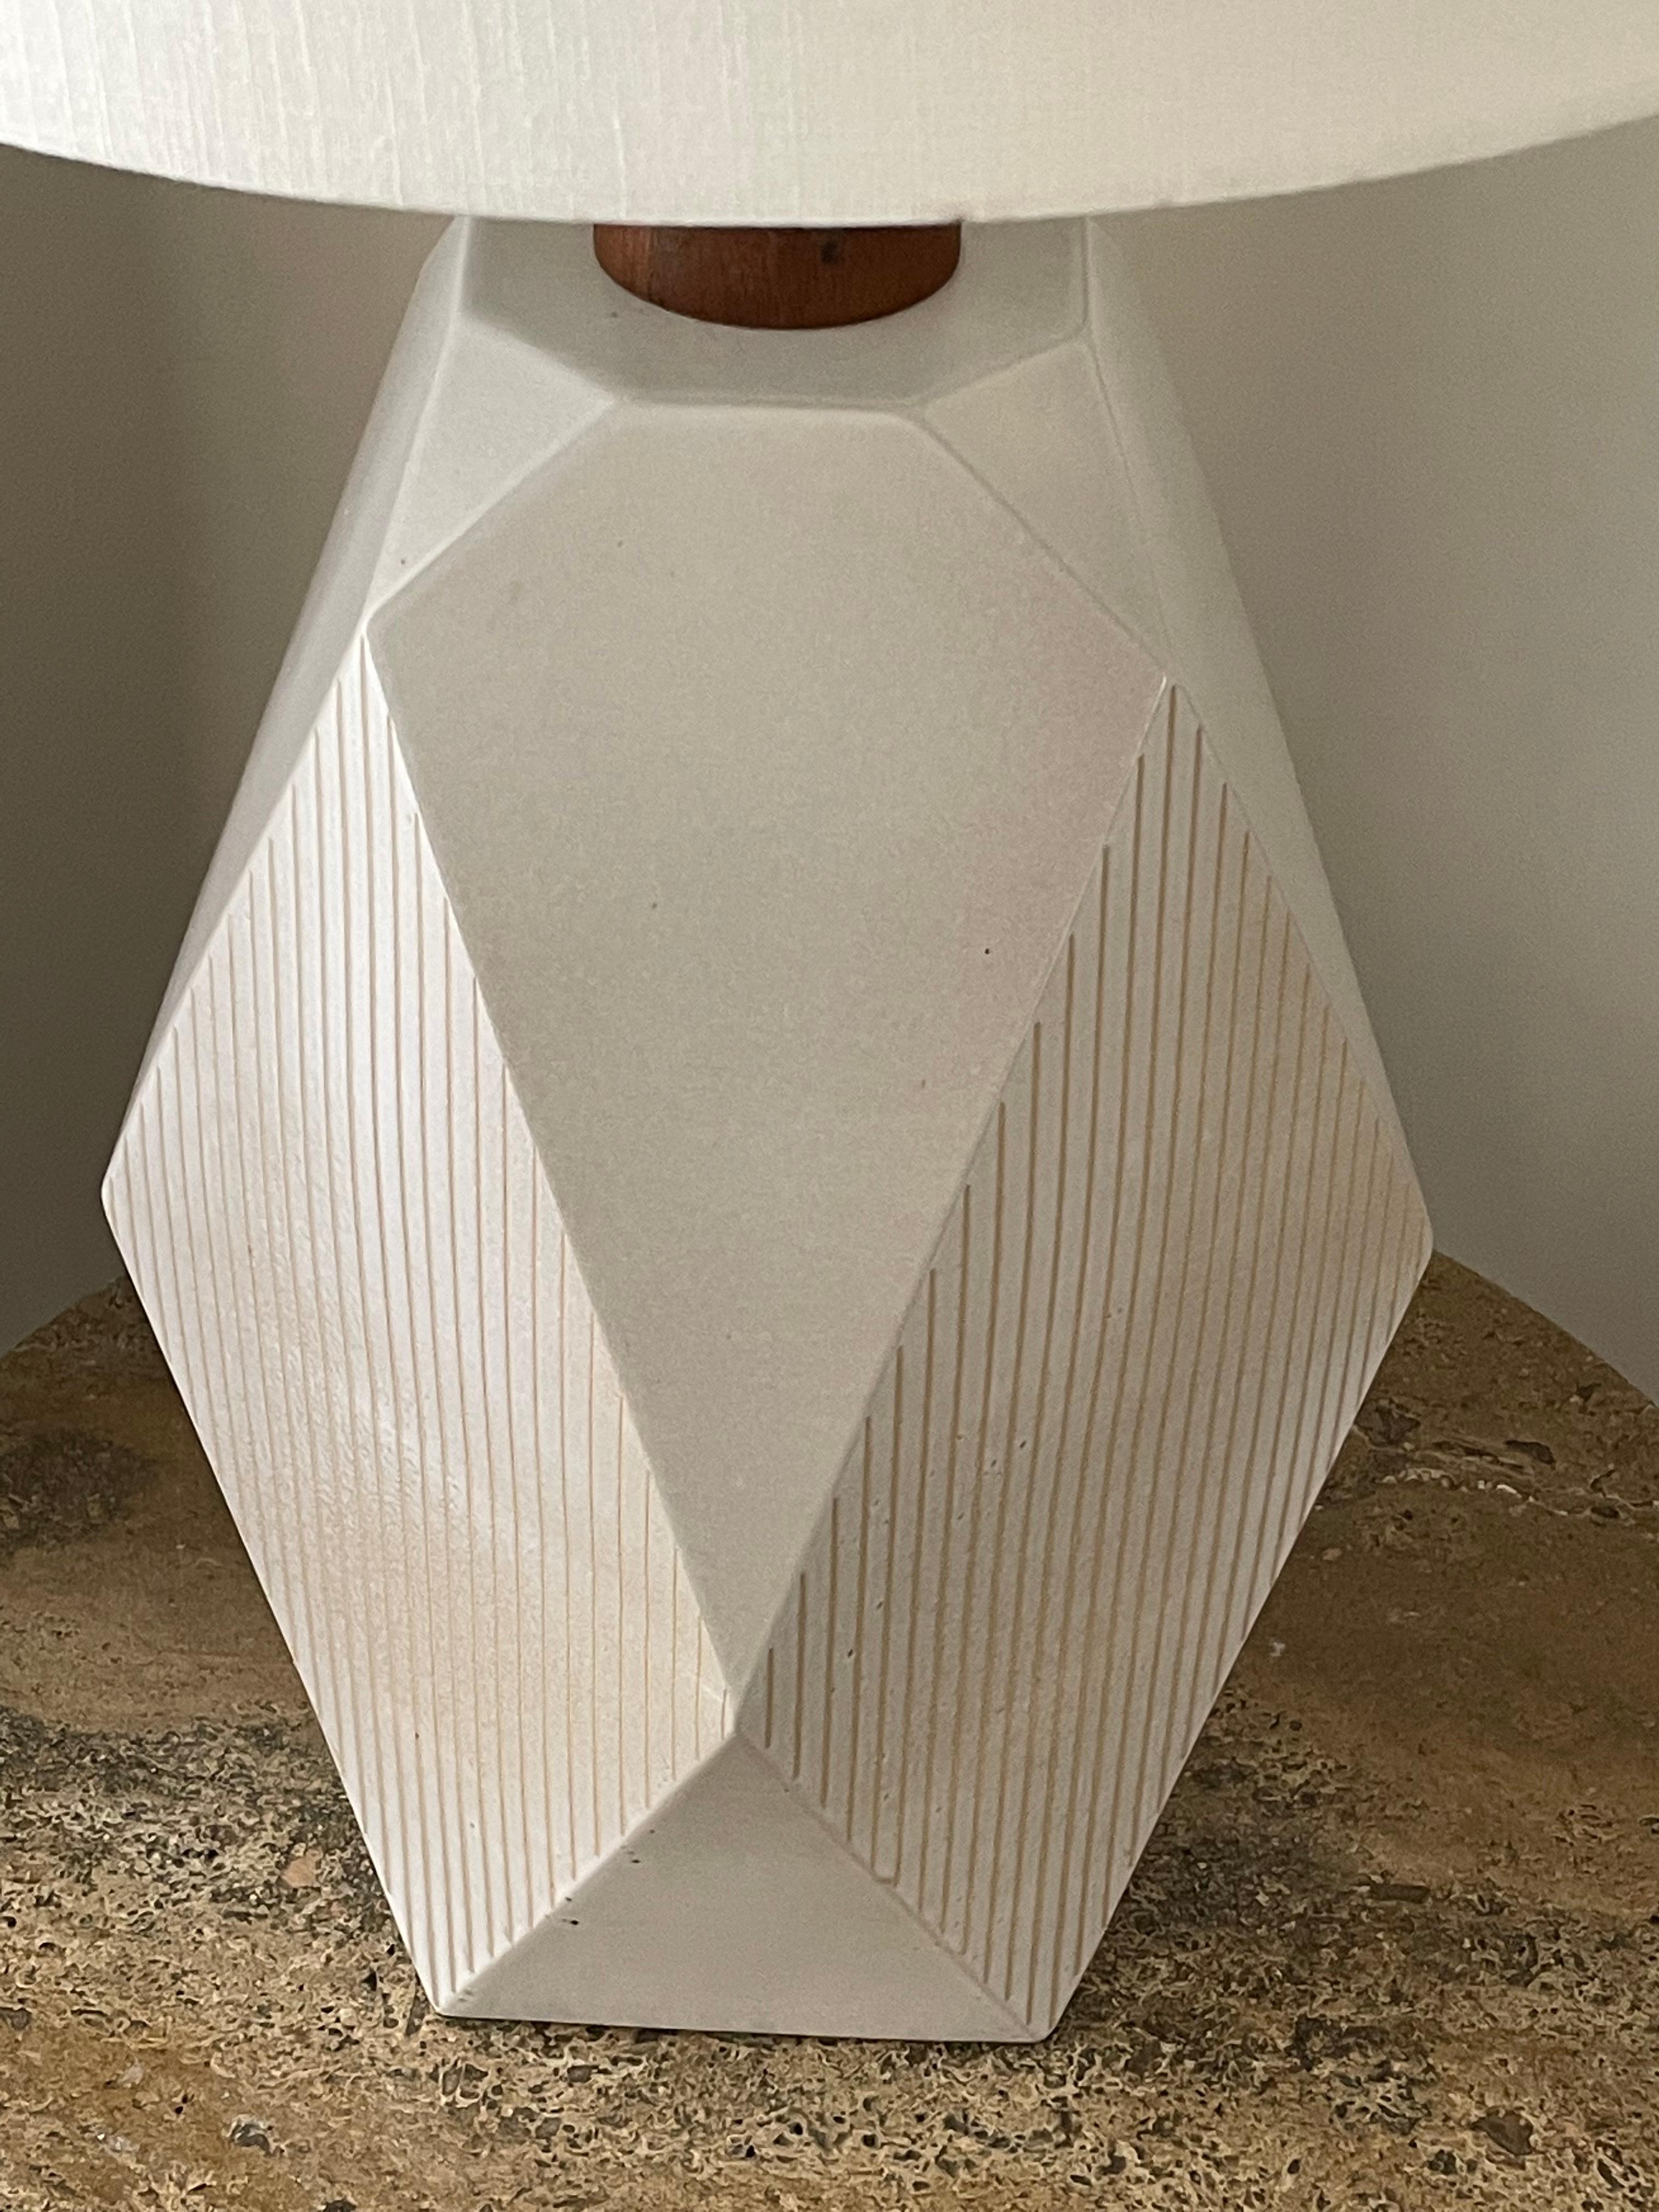 Rare diamond shaped table lamp in off white with incised detail by ceramicist duo Jane and Gordon Martz. This particular lamp is signed Genesis which means it was produced in the 1990s. In the early 1990s Genesis bought and took over production from